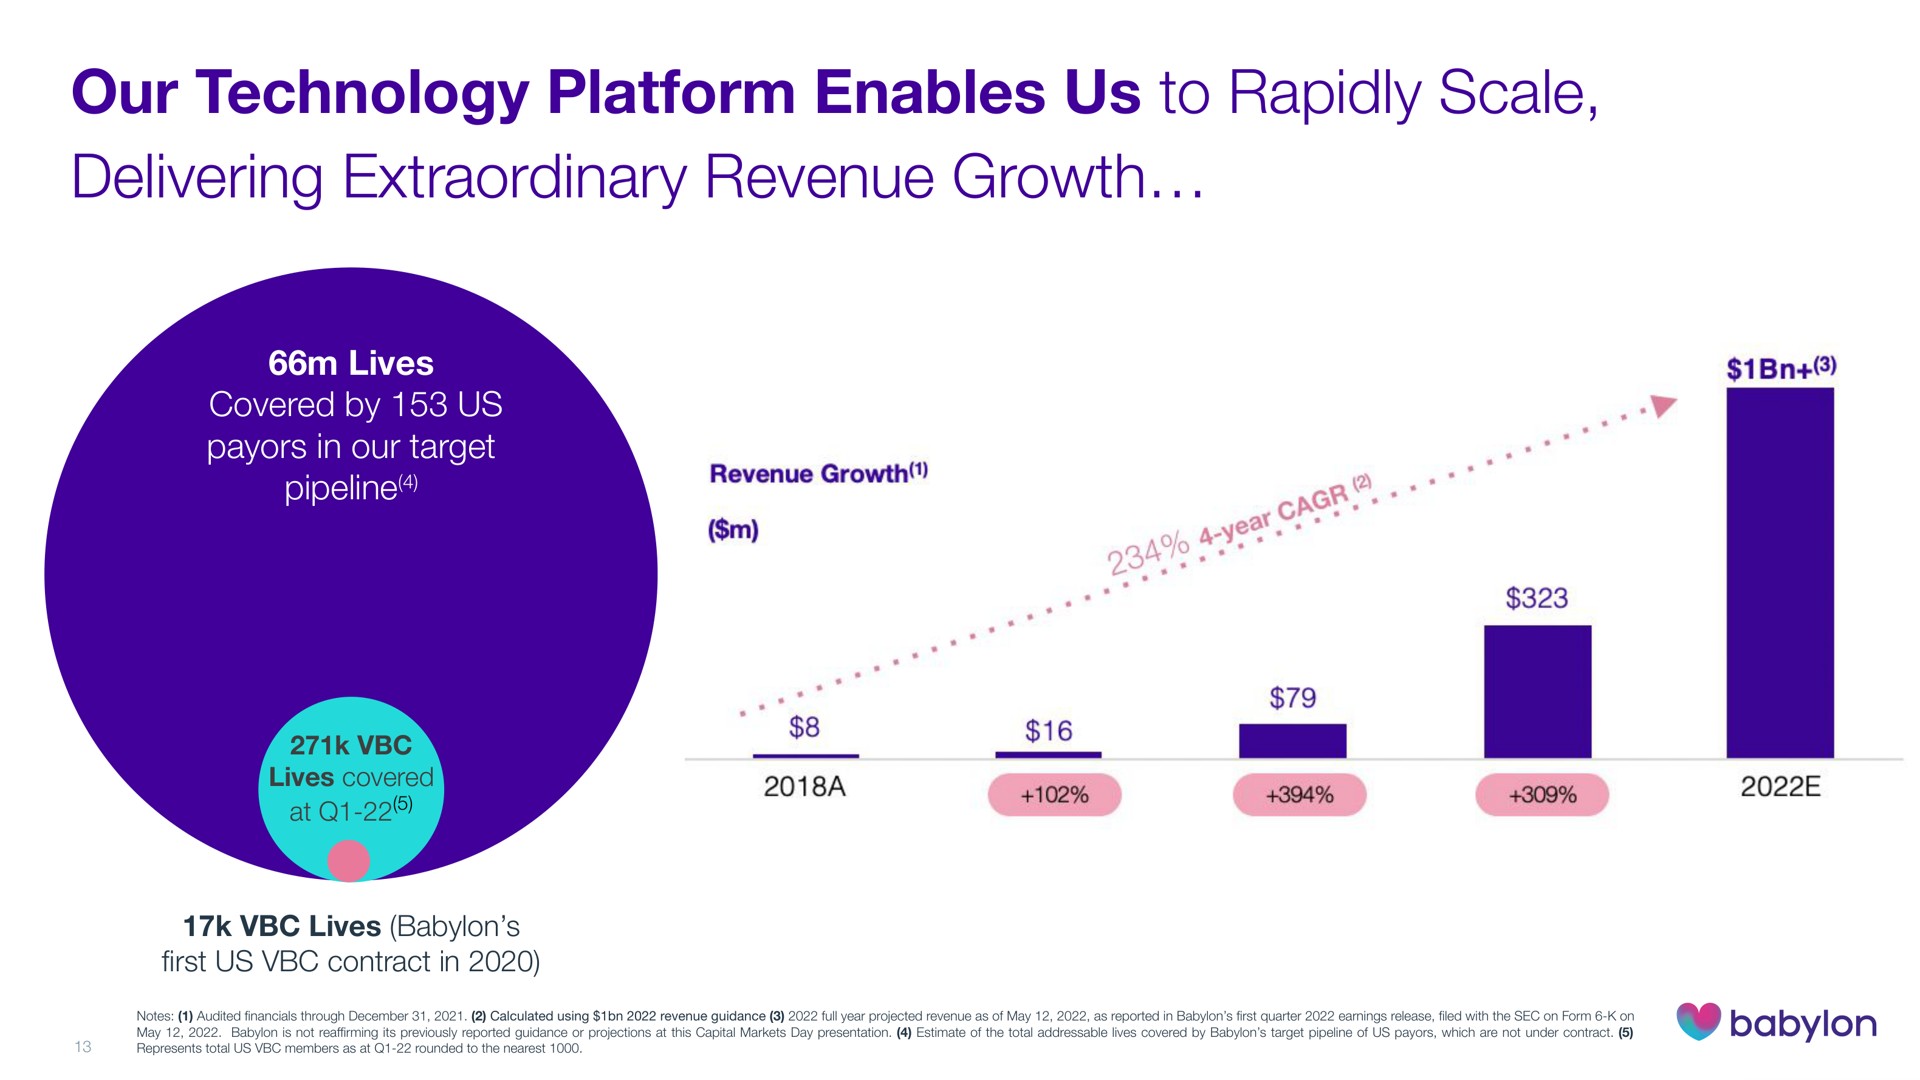 our technology platform enables us to rapidly scale delivering extraordinary revenue growth | Babylon